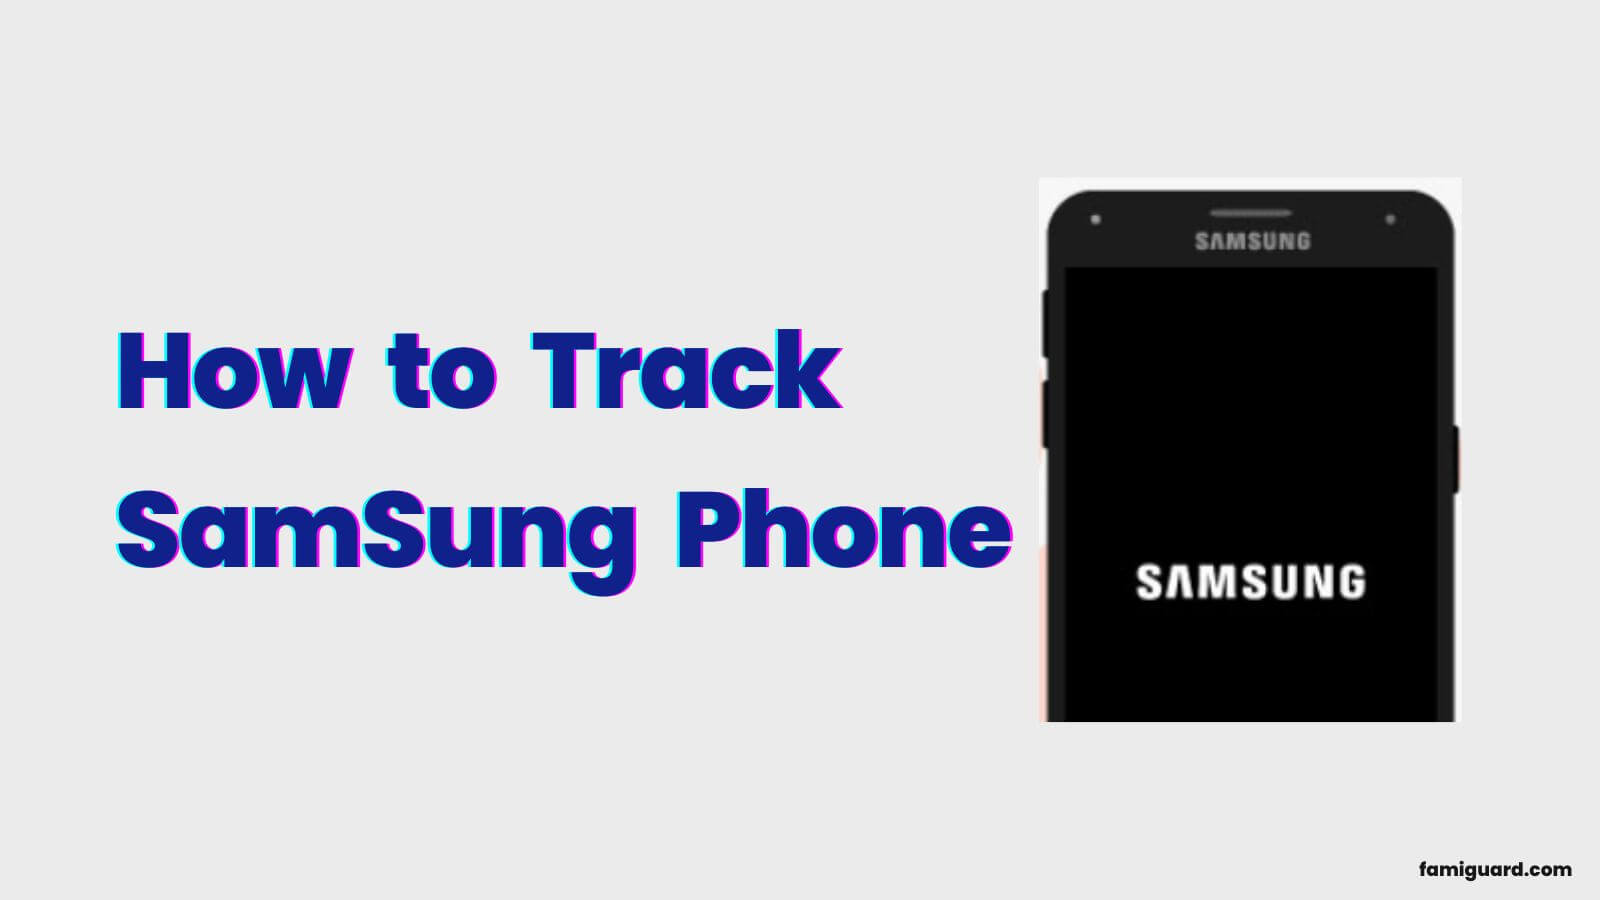 -How to Track Samsung Phone